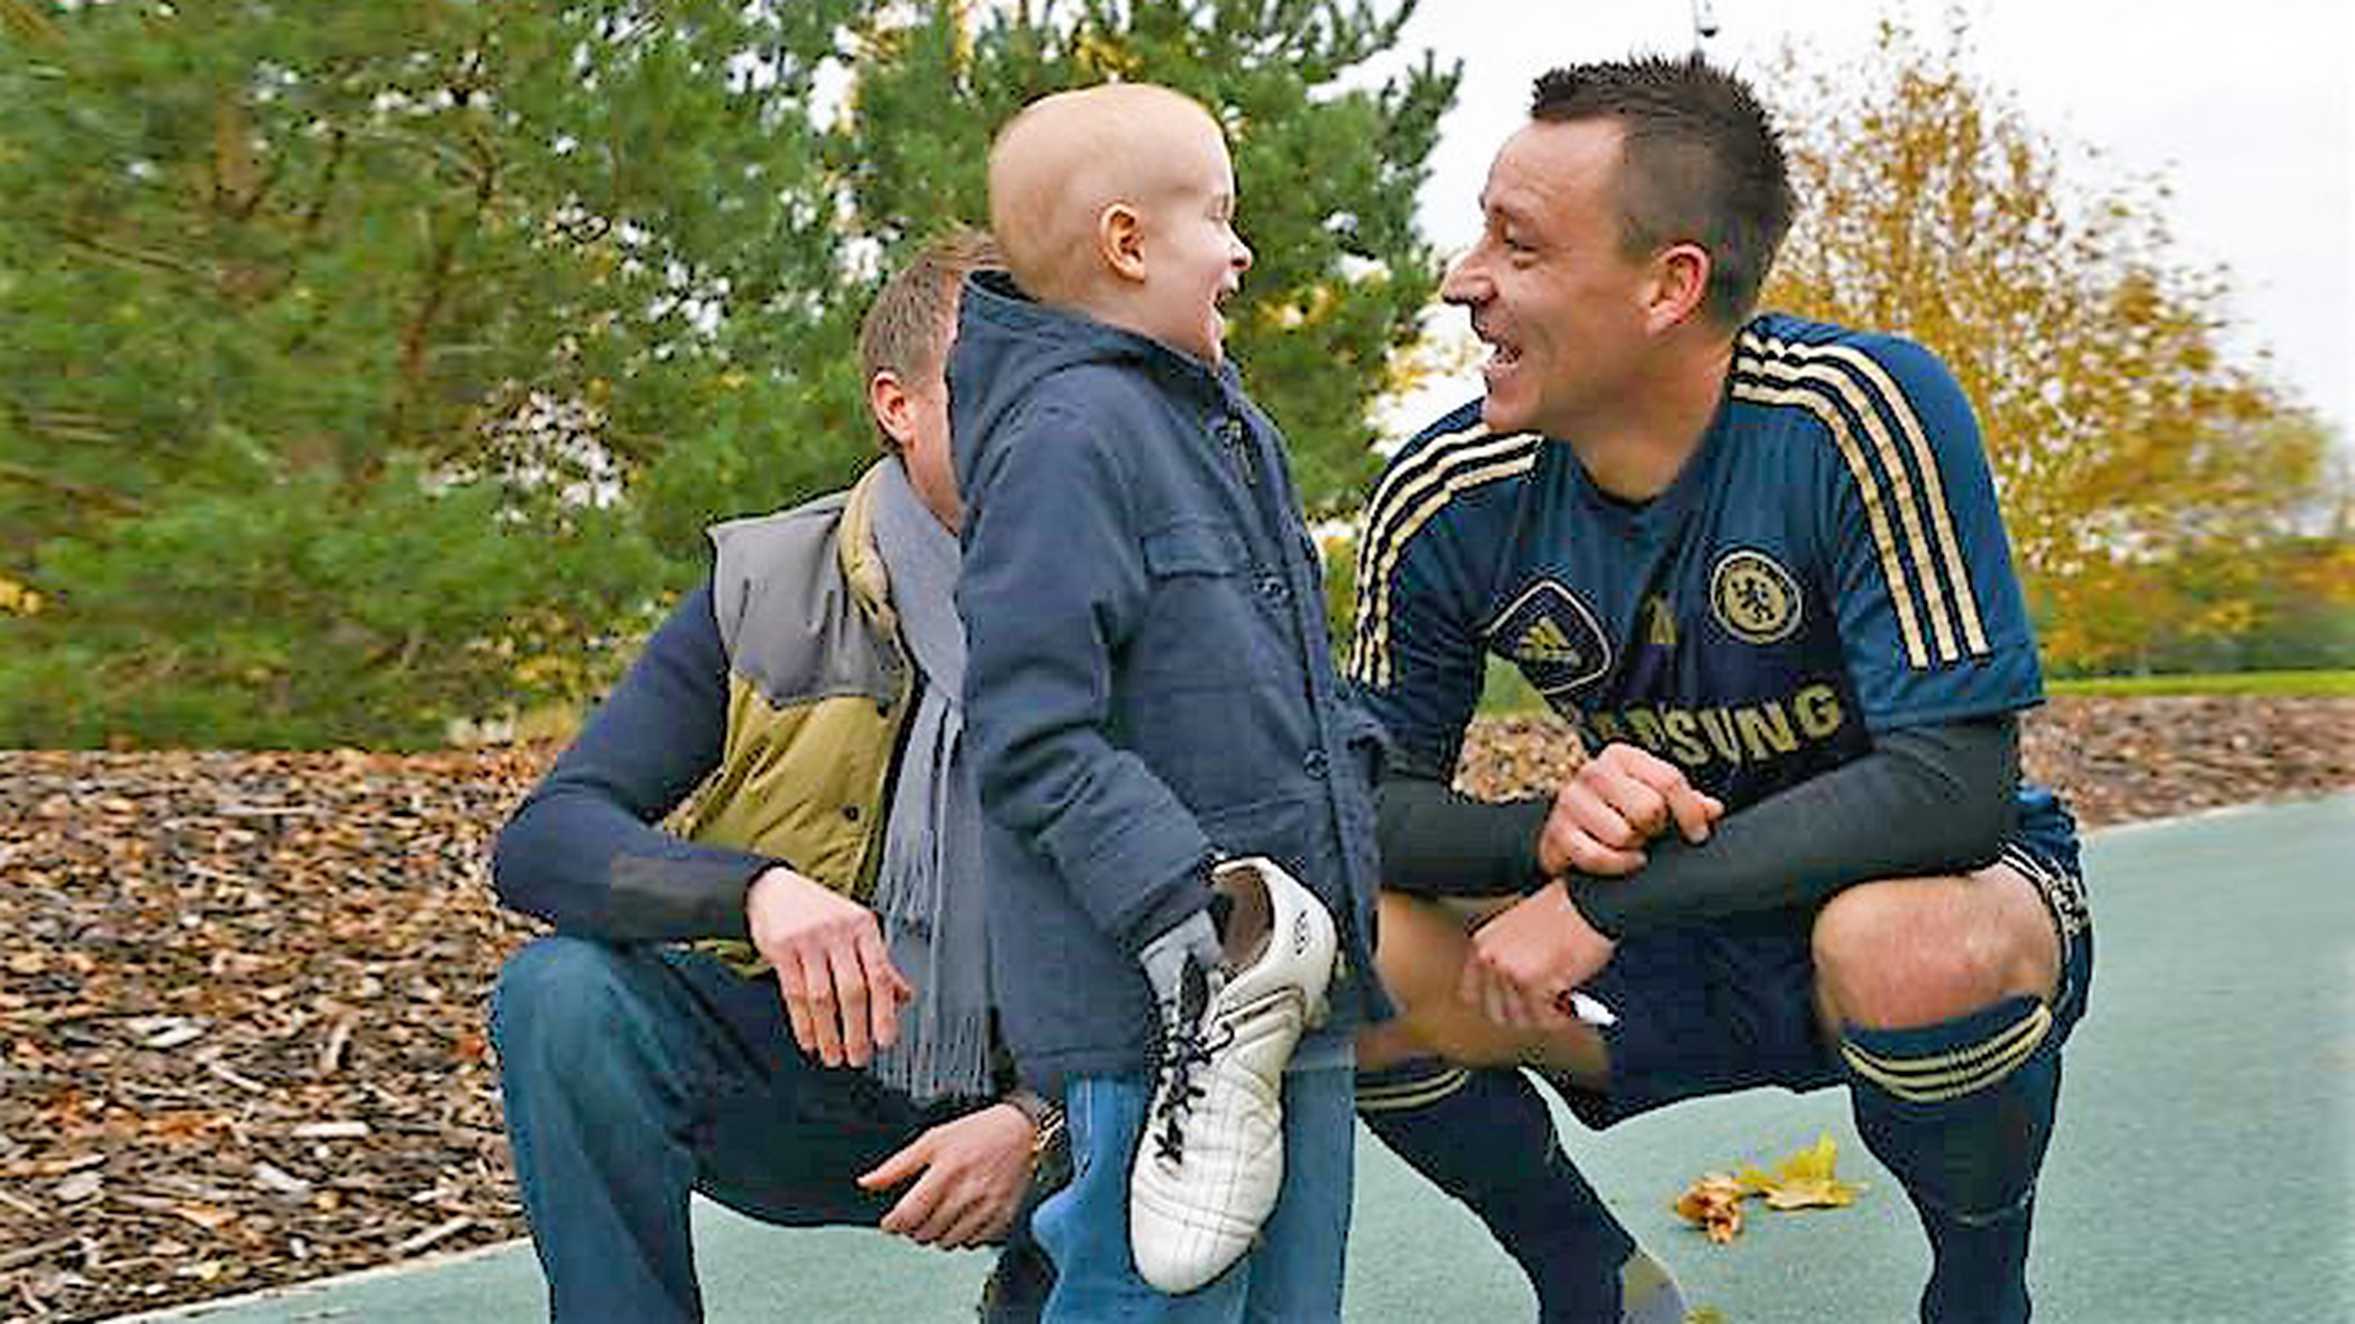 Footballer, John Terry crouched down and chatting with wish child, Oscar.